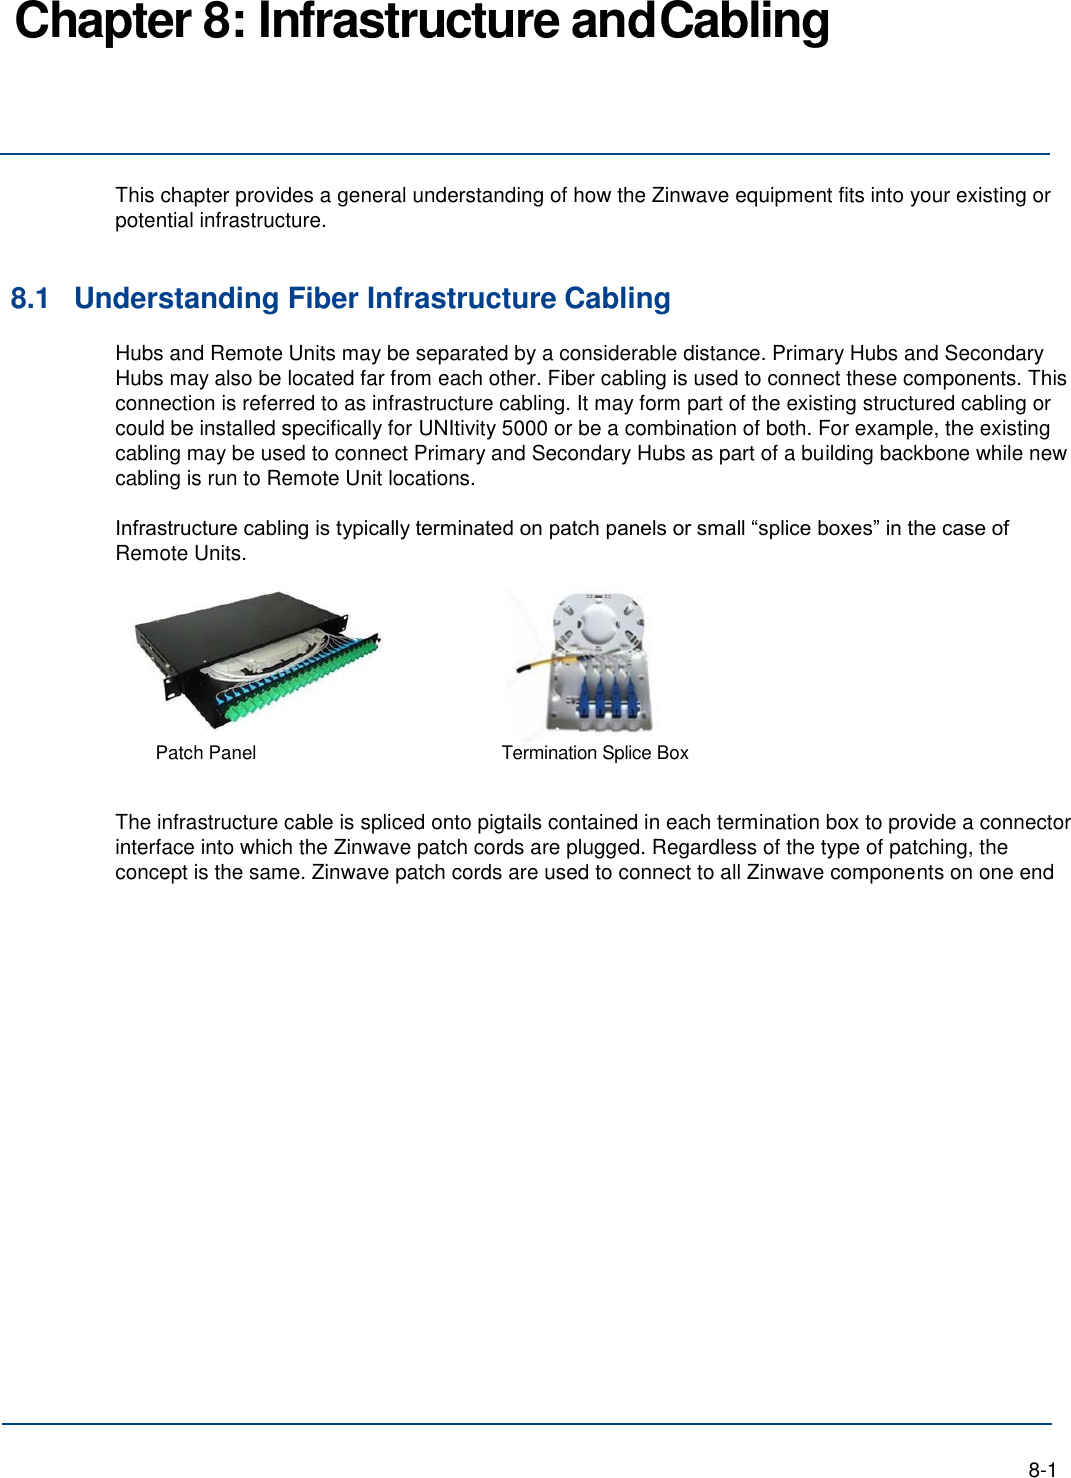 Chapter 8: Infrastructure and Cabling     This chapter provides a general understanding of how the Zinwave equipment fits into your existing or potential infrastructure.   8.1 Understanding Fiber Infrastructure Cabling Hubs and Remote Units may be separated by a considerable distance. Primary Hubs and Secondary Hubs may also be located far from each other. Fiber cabling is used to connect these components. This connection is referred to as infrastructure cabling. It may form part of the existing structured cabling or could be installed specifically for UNItivity 5000 or be a combination of both. For example, the existing cabling may be used to connect Primary and Secondary Hubs as part of a building backbone while new cabling is run to Remote Unit locations.  Infrastructure cabling is typically terminated on patch panels or small “splice boxes” in the case of Remote Units.  Patch Panel  Termination Splice Box   The infrastructure cable is spliced onto pigtails contained in each termination box to provide a connector interface into which the Zinwave patch cords are plugged. Regardless of the type of patching, the concept is the same. Zinwave patch cords are used to connect to all Zinwave components on one end                        8-1 